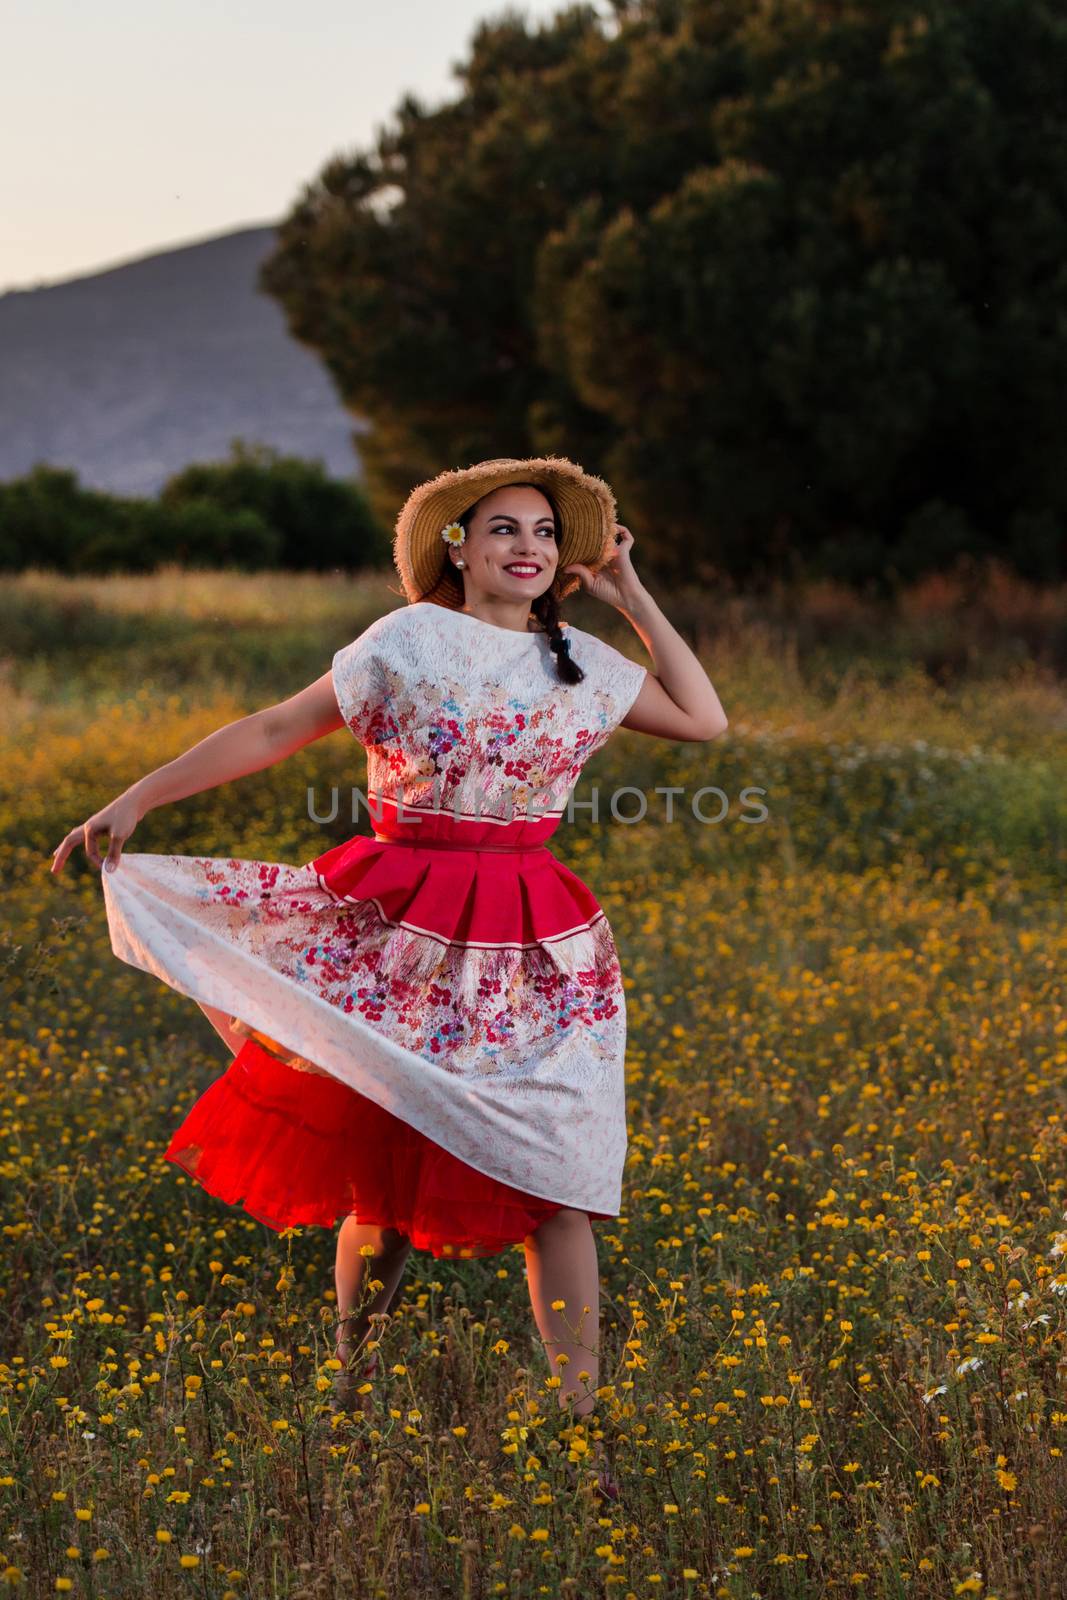 Vintage girl on the countryside by membio